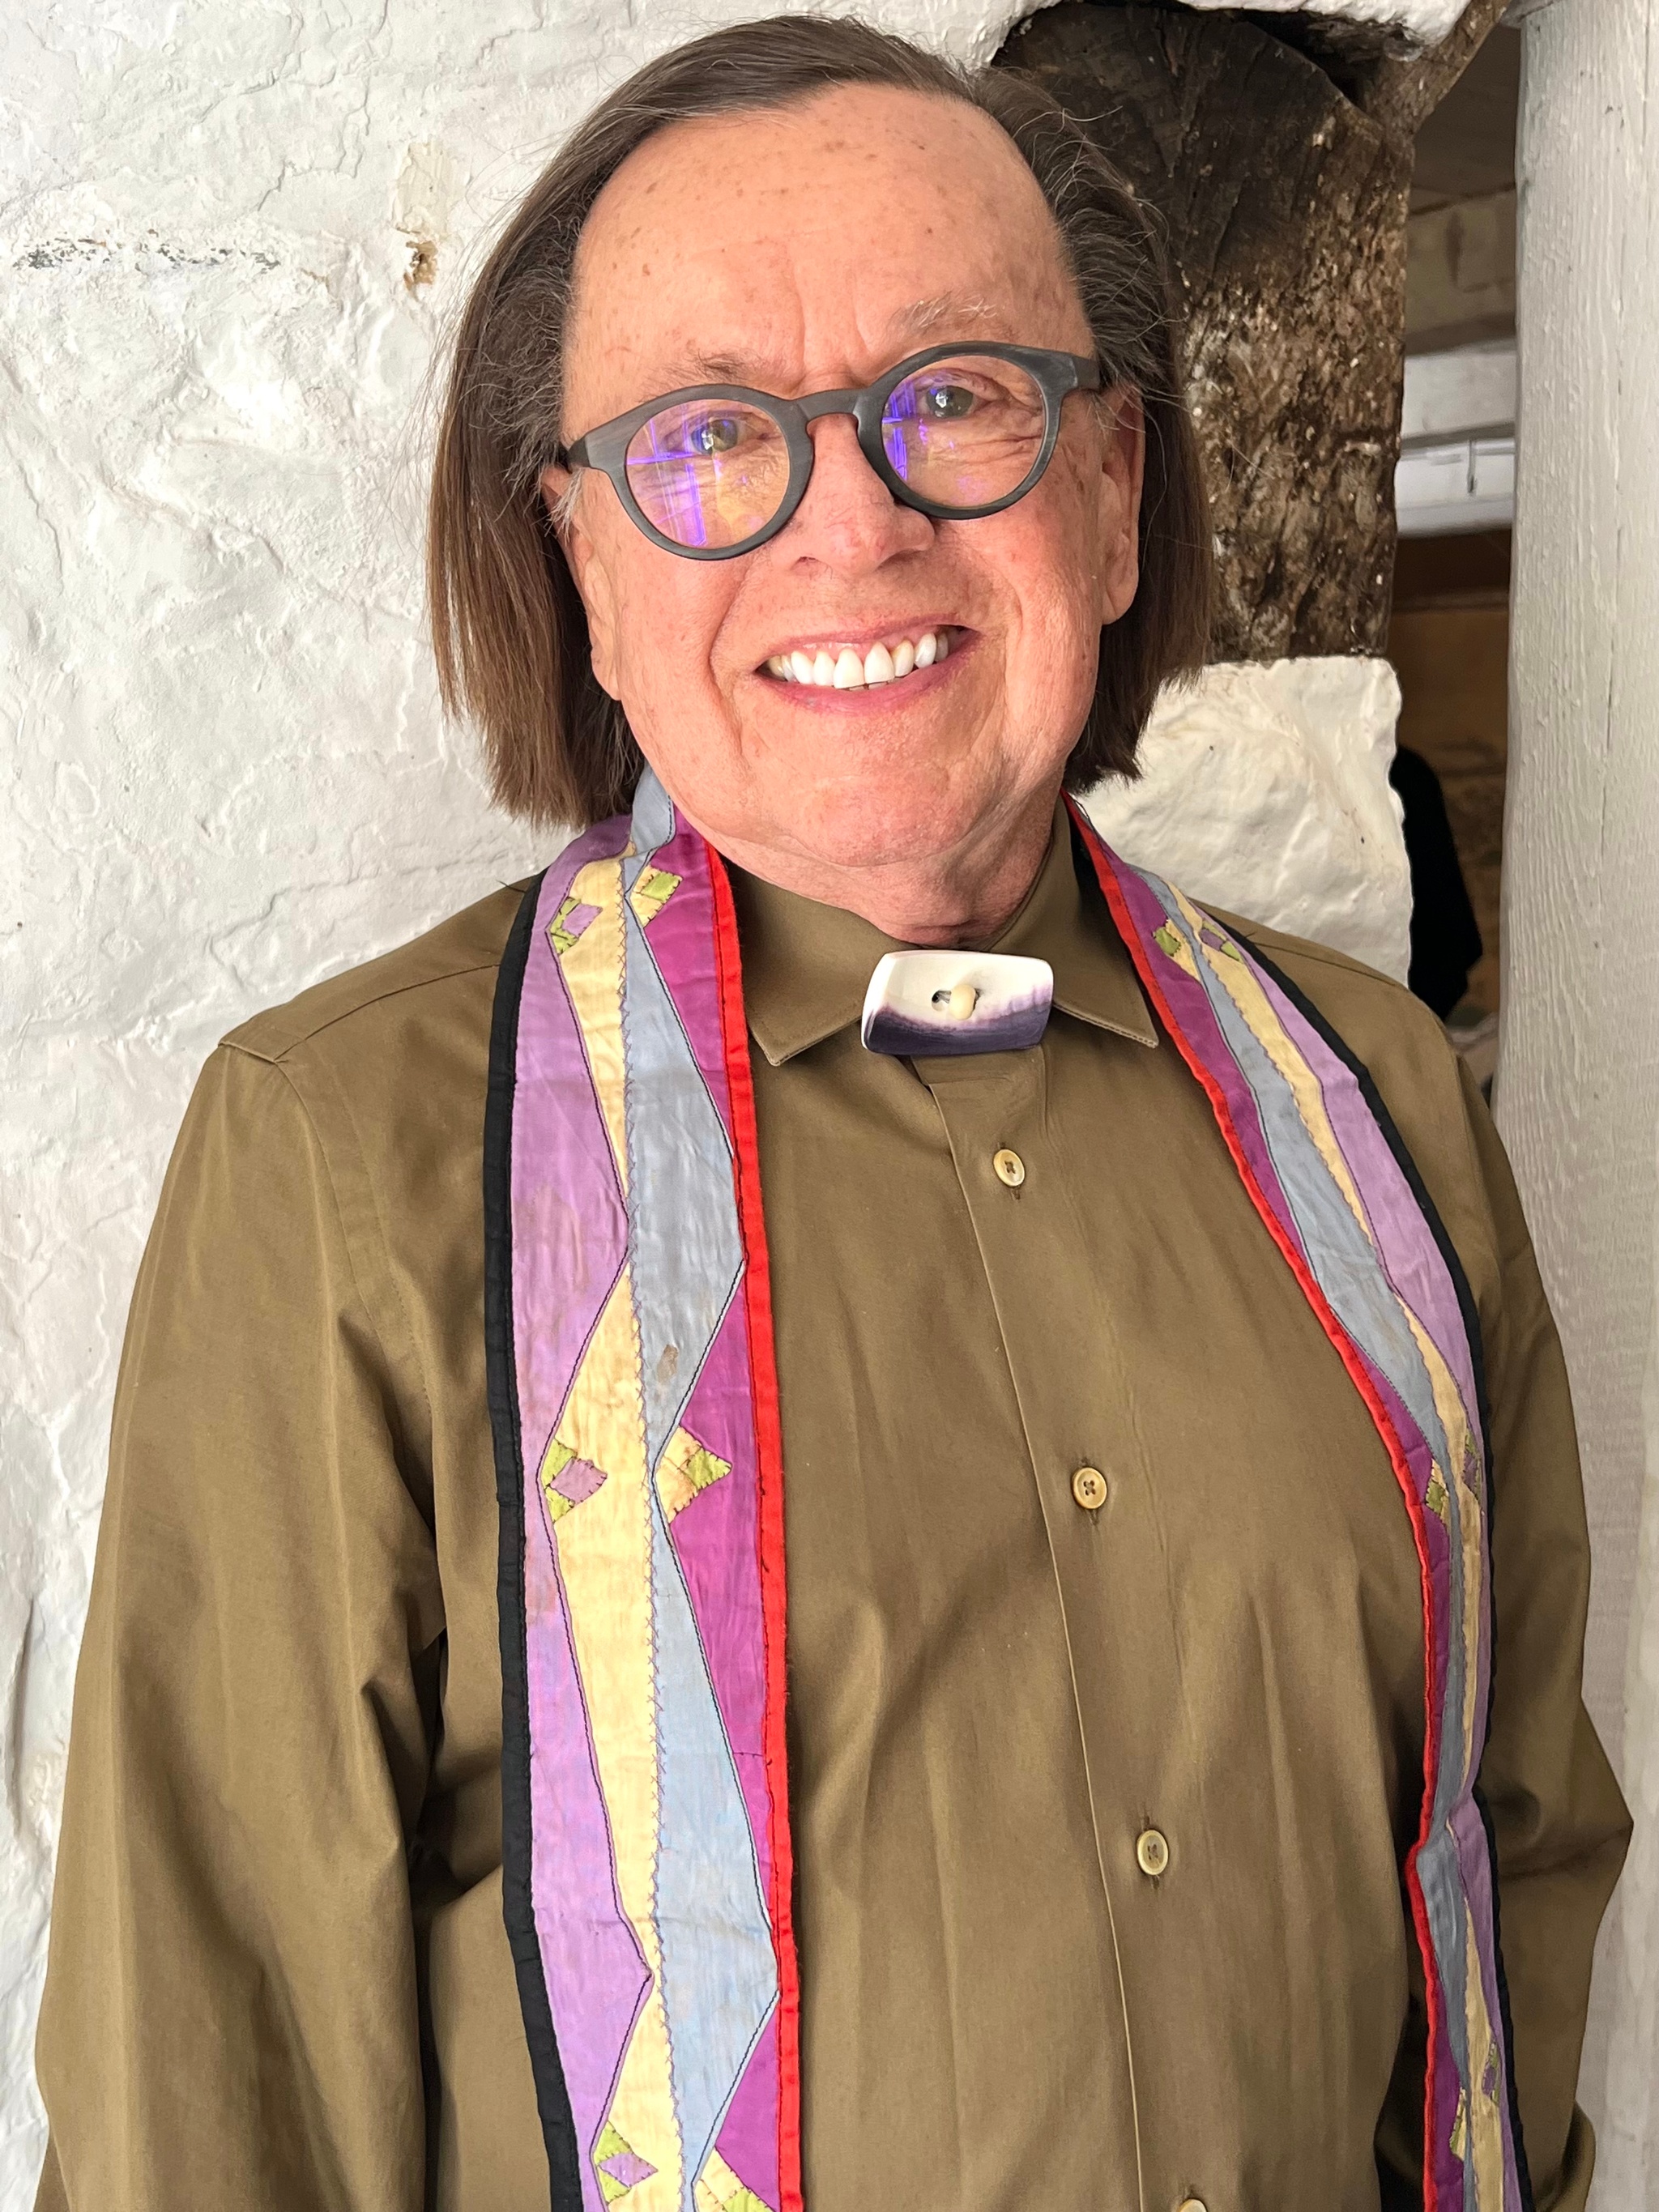 A portrait of Joe Baker. He smiles at us standing with arms at his side. He has chin-length hair parted to one side and wears glasses. He wears an olive-green button down shirt with a narrow stole draped around his neck. It has a geometric pattern in pink, yellow, light blue, and magenta. 